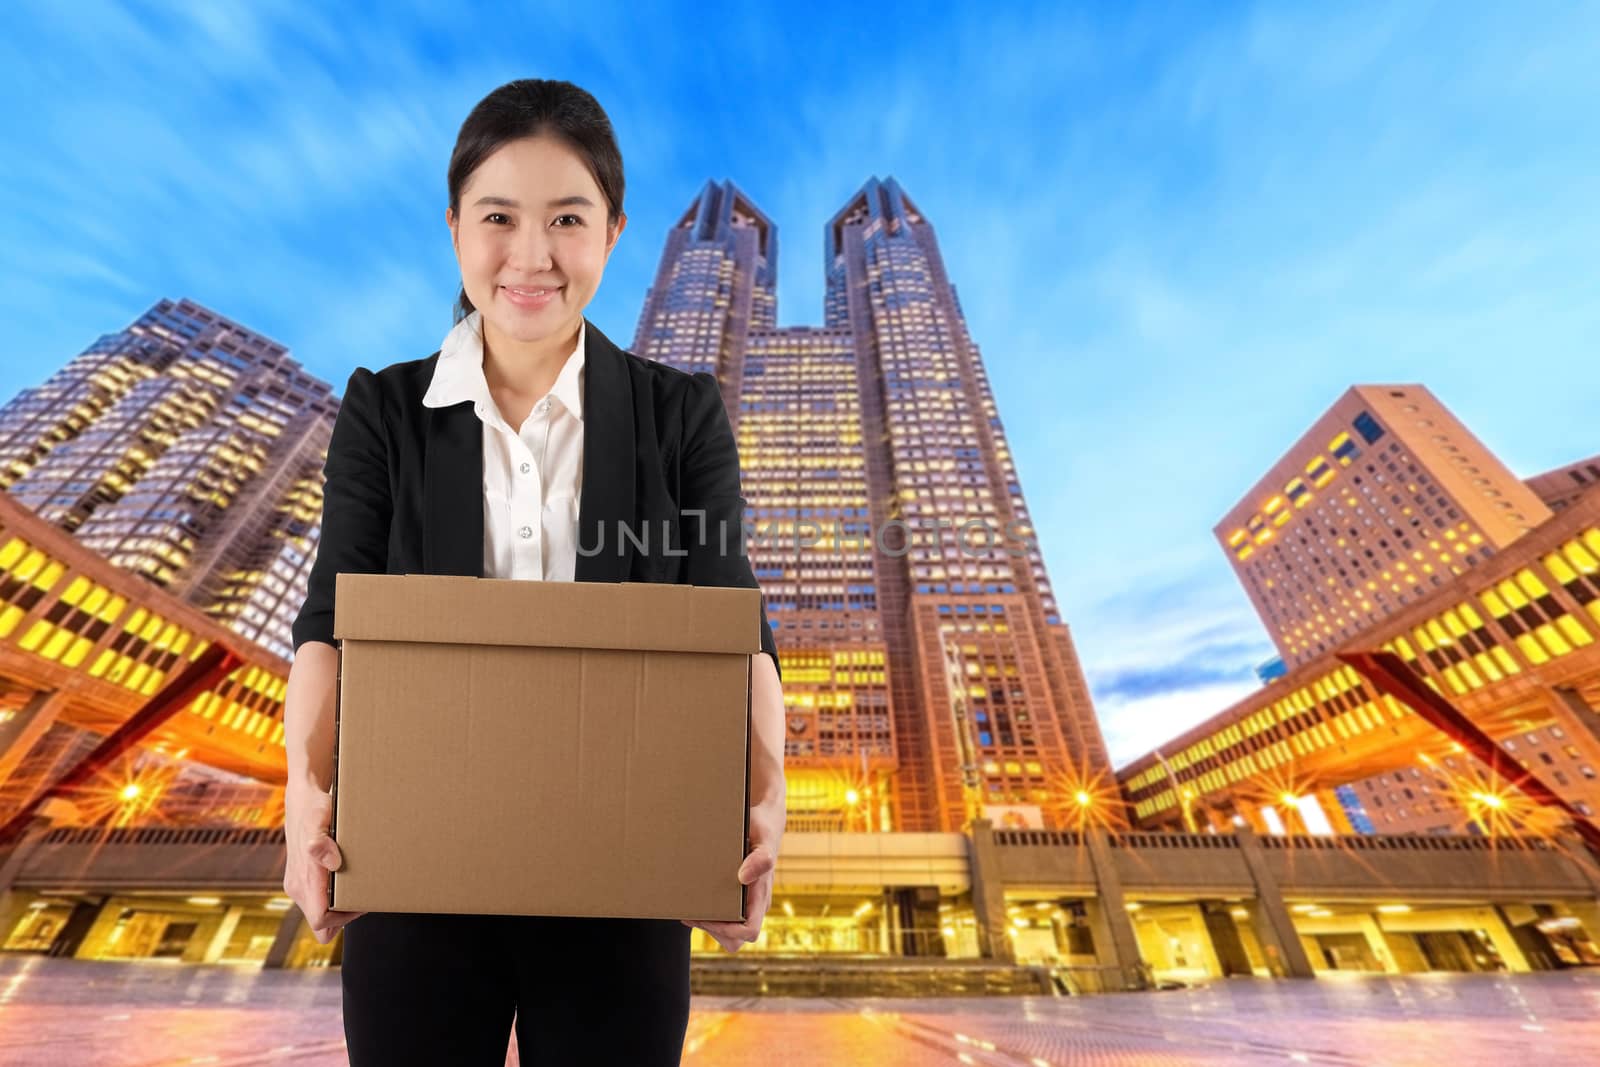 A young woman carrying a box wtih smile in night cityscape background

